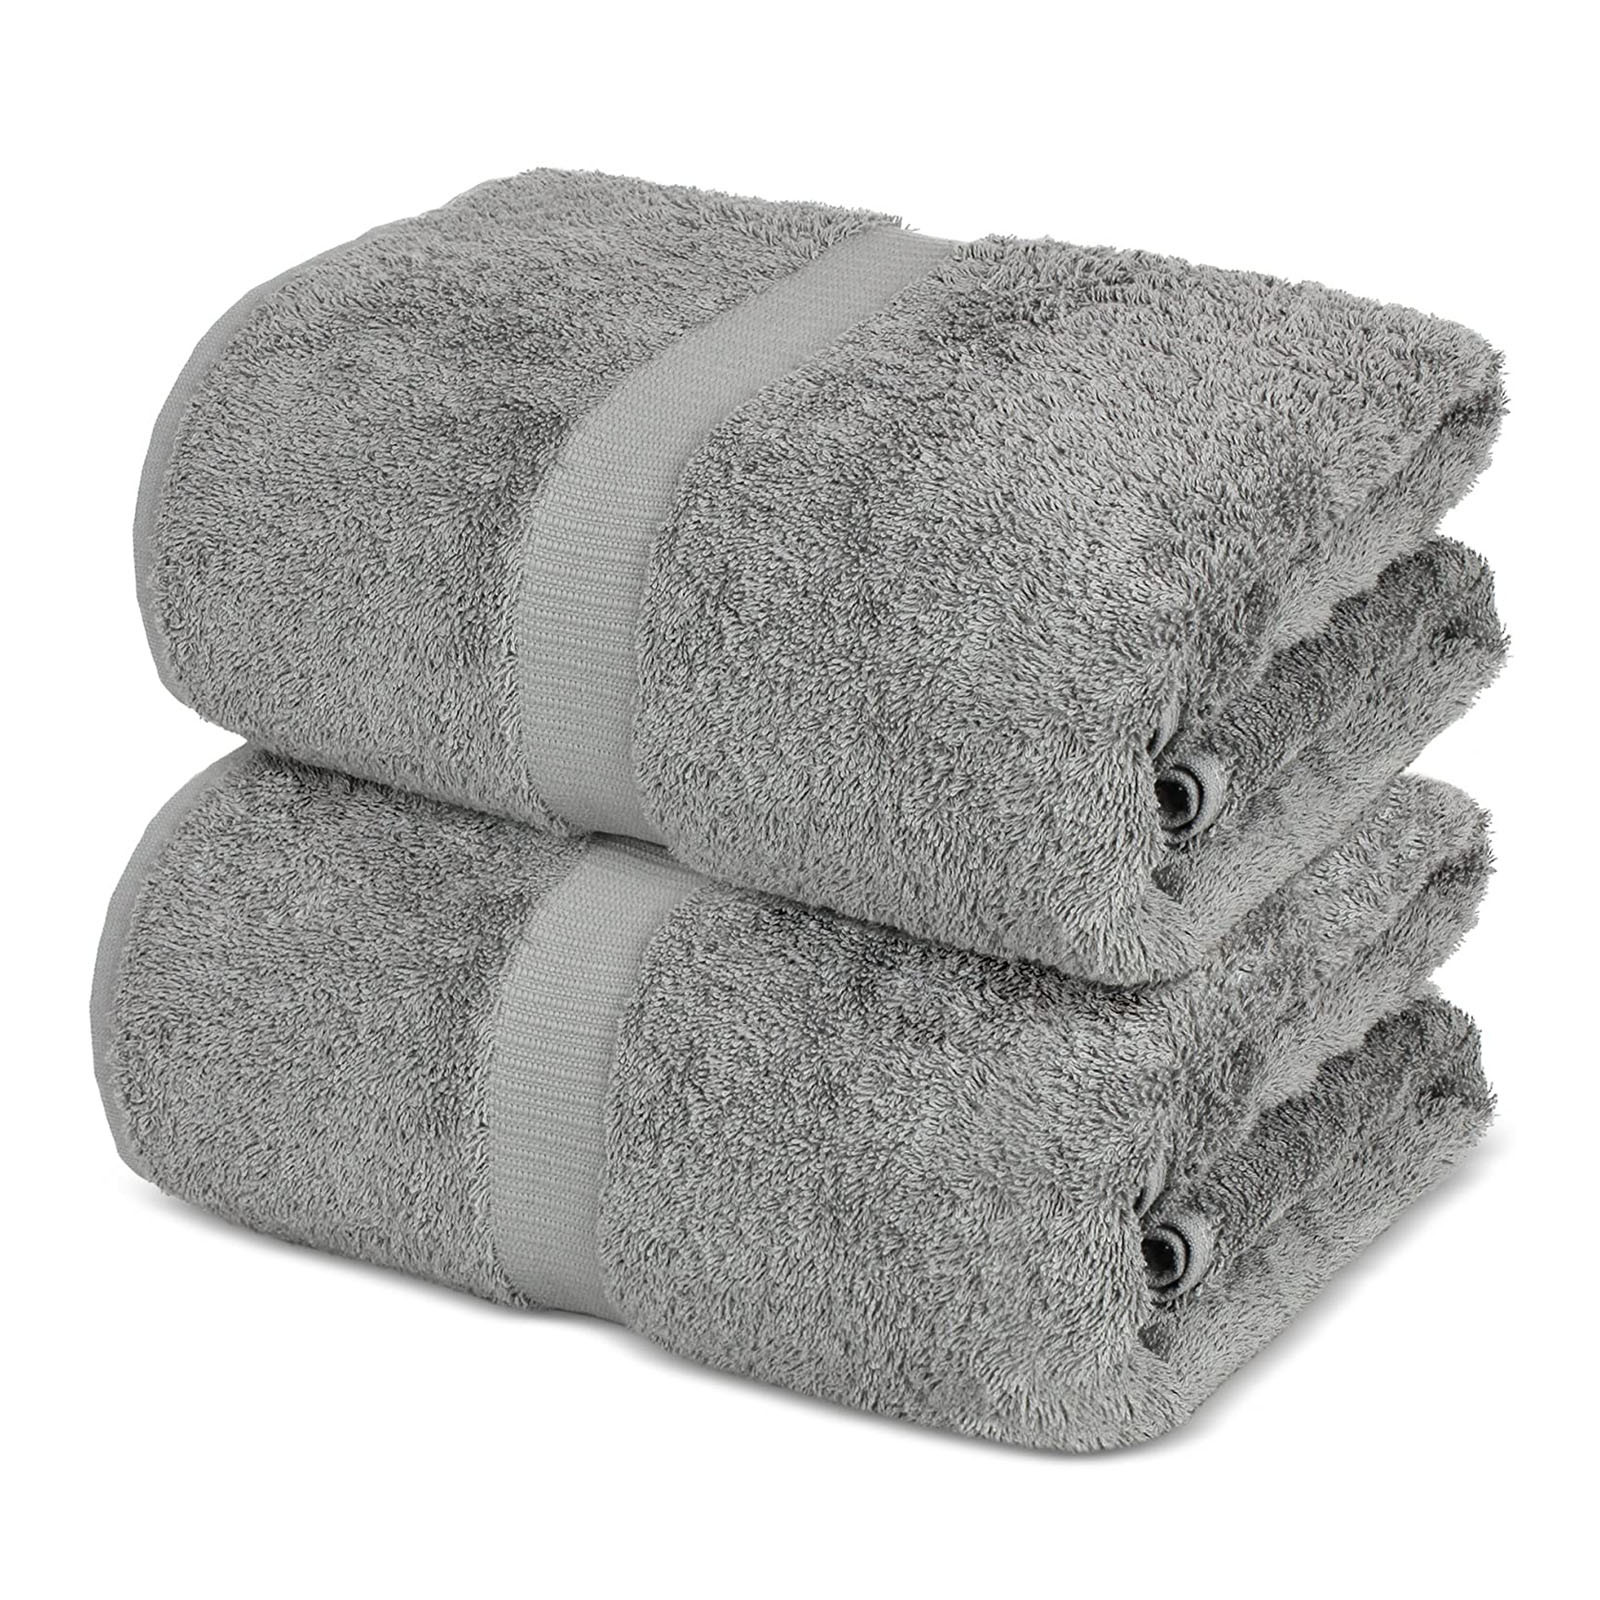 2PC Towel Facecloth Soft Absorbent Thick 100% Turkish Cotton Bath Sheets 700 GSM 35 x 70 Inch Household Adults bath towel #40